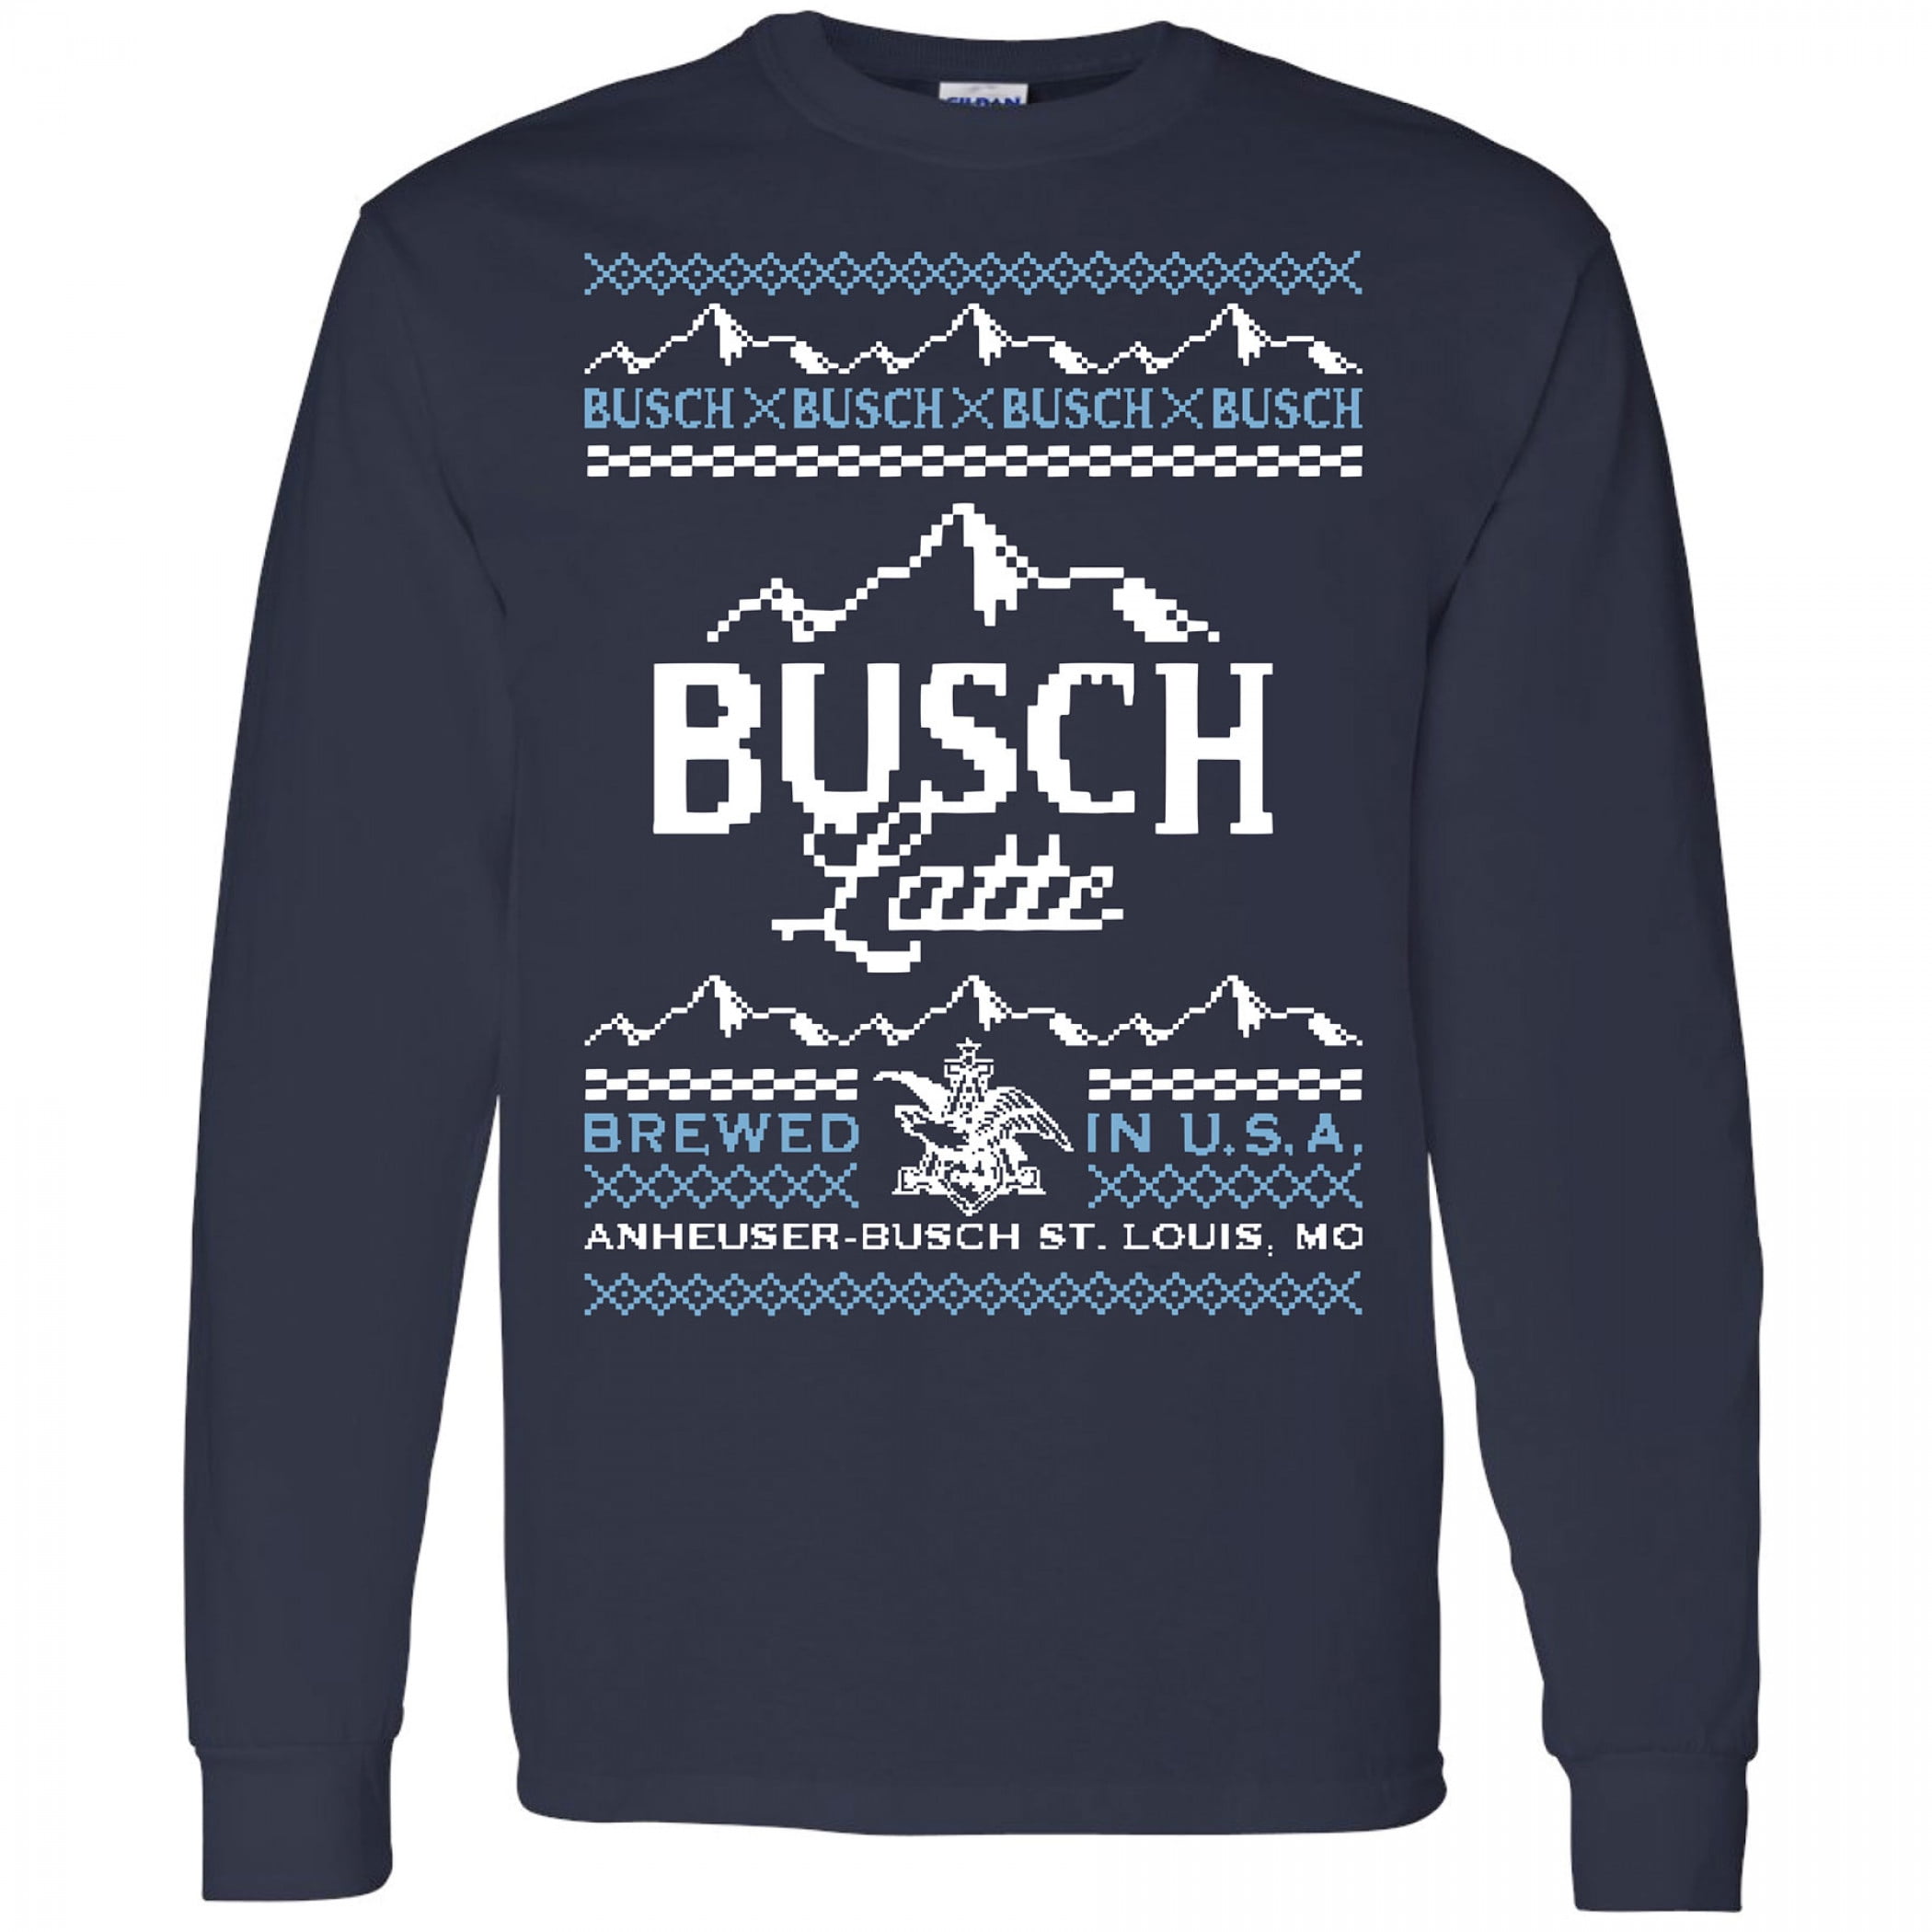 BUSCH Beer Rude Funny T-shirt College Cheap Alcohol Party Long Sleeve Tee 